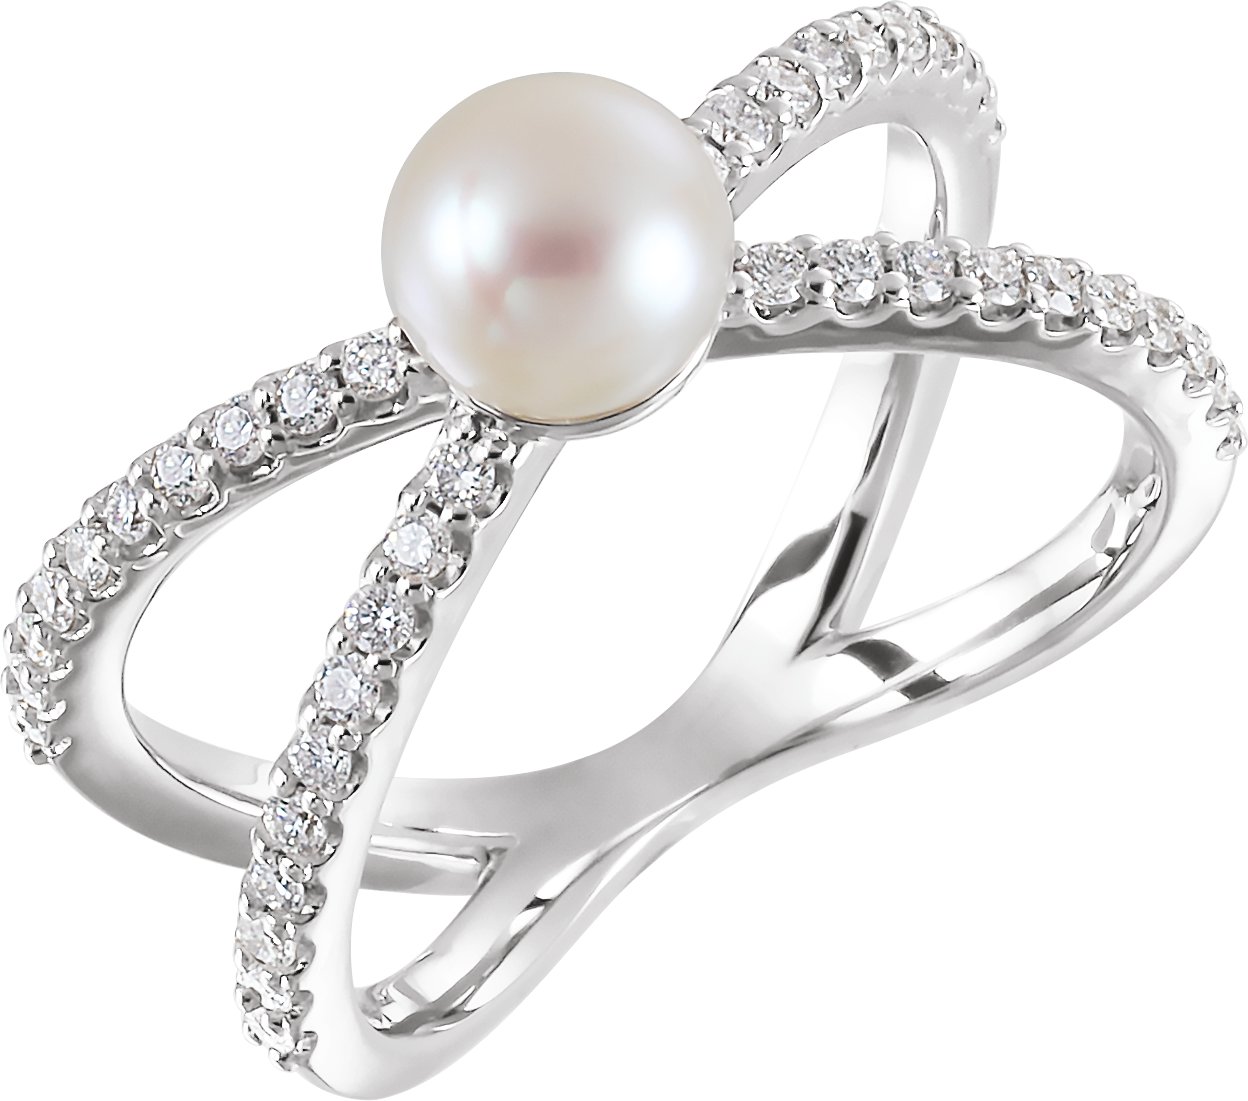 Accented Negative Space Pearl Ring